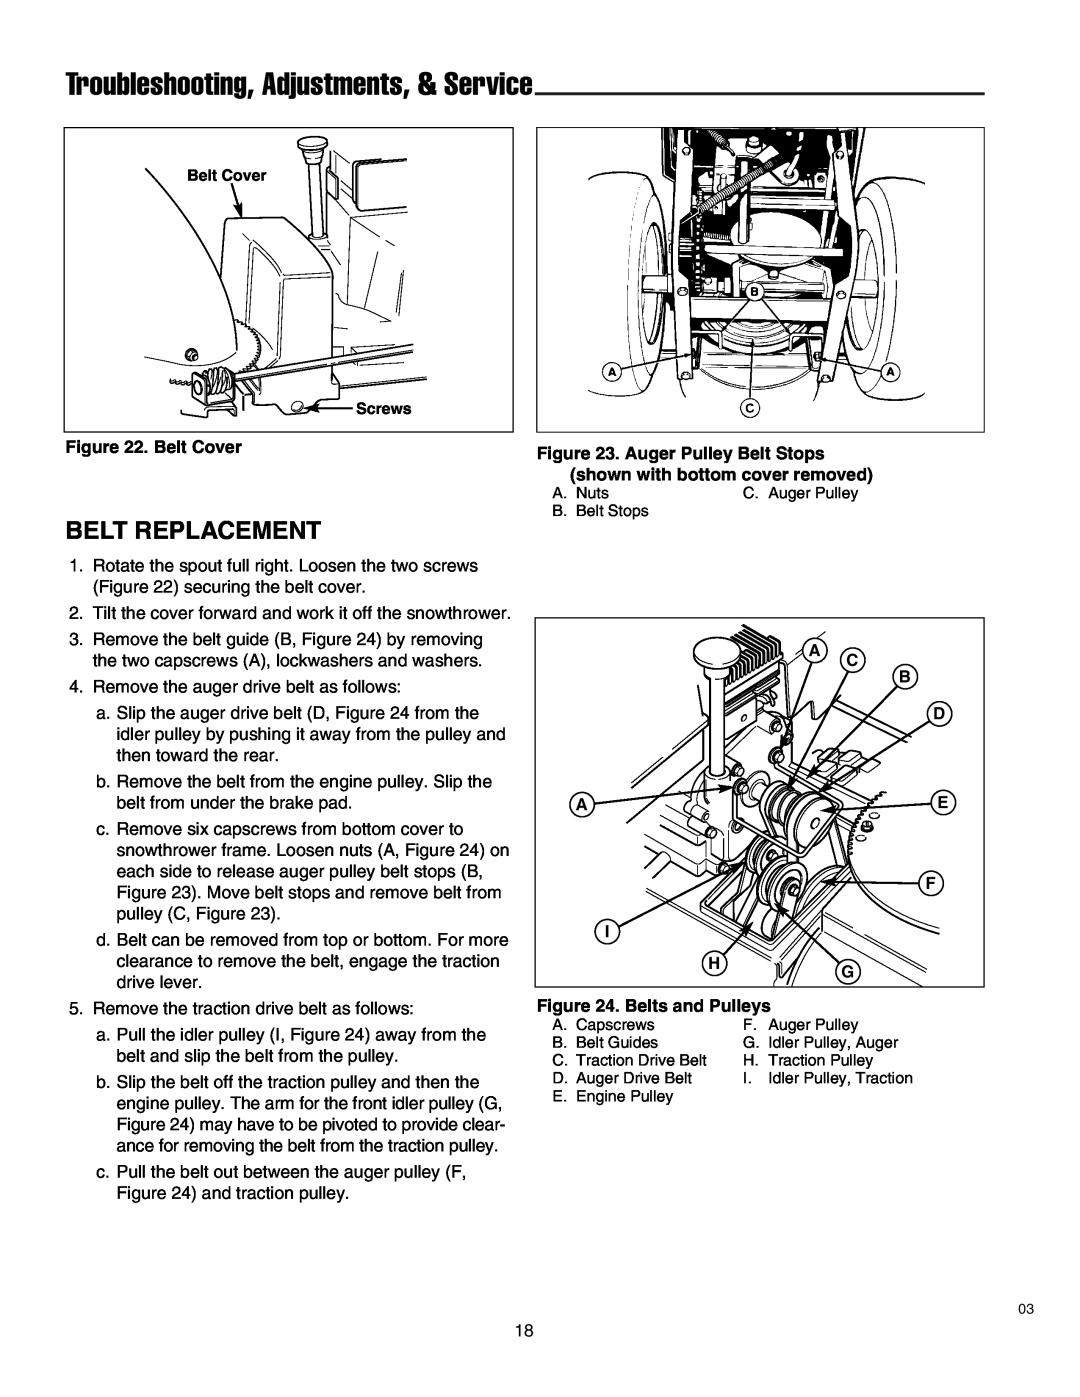 Simplicity 1693651 860M manual Belt Replacement, Troubleshooting, Adjustments, & Service, Belt Cover, Belts and Pulleys 